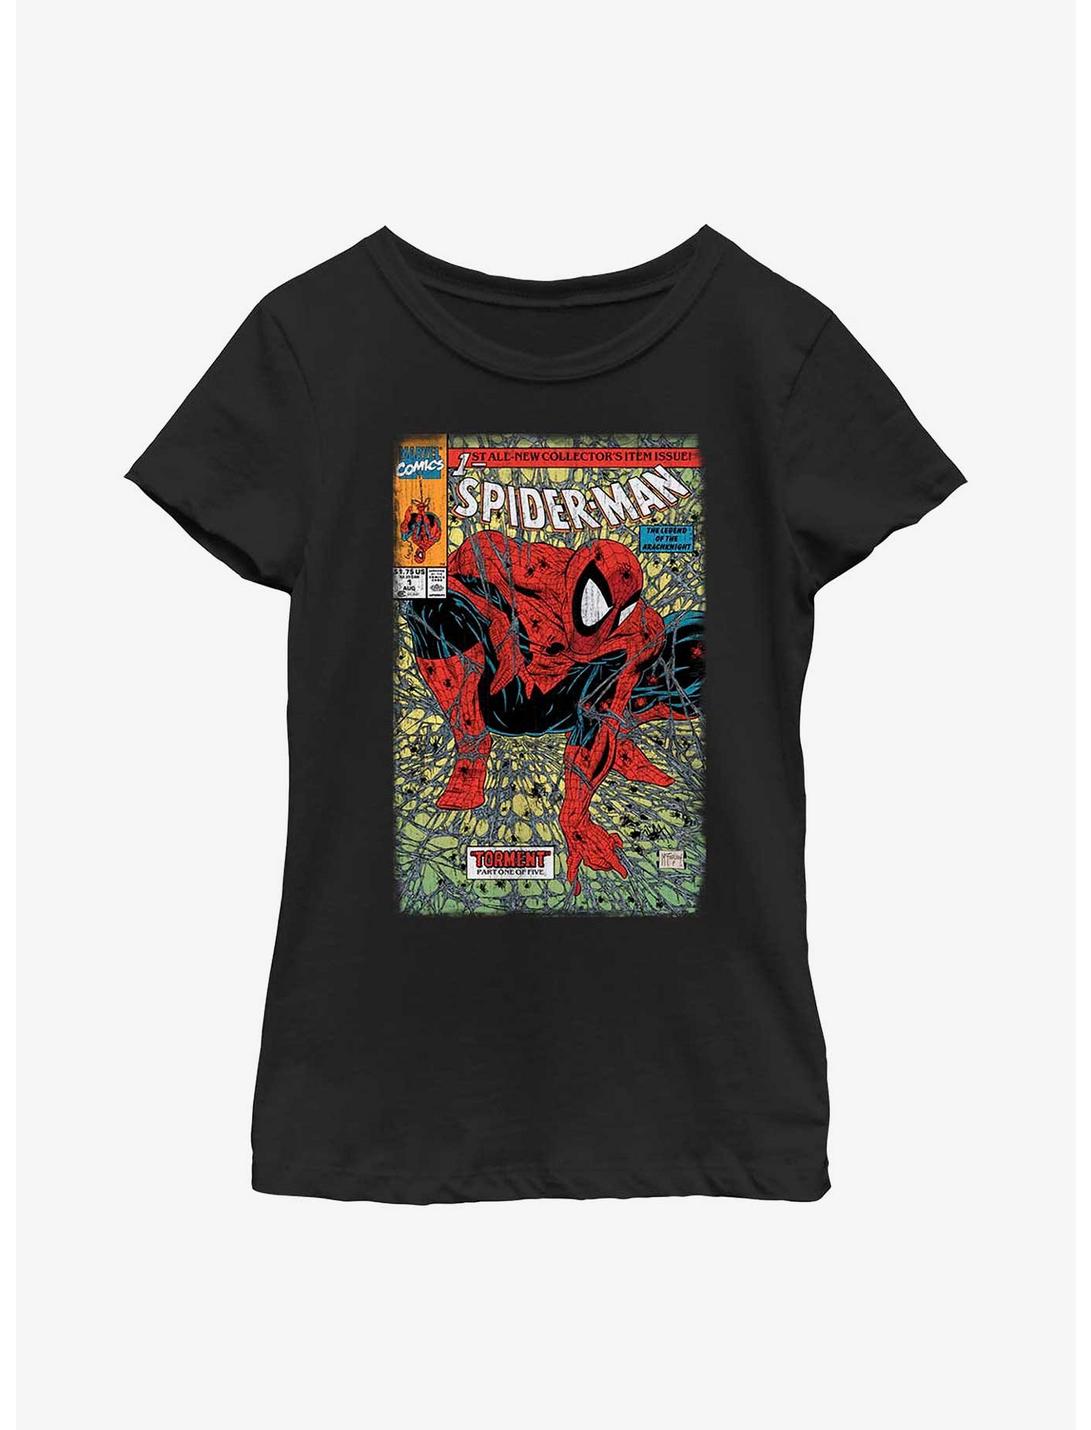 Marvel Spider-Man Torment Comic Book Cover Youth Girls T-Shirt, BLACK, hi-res